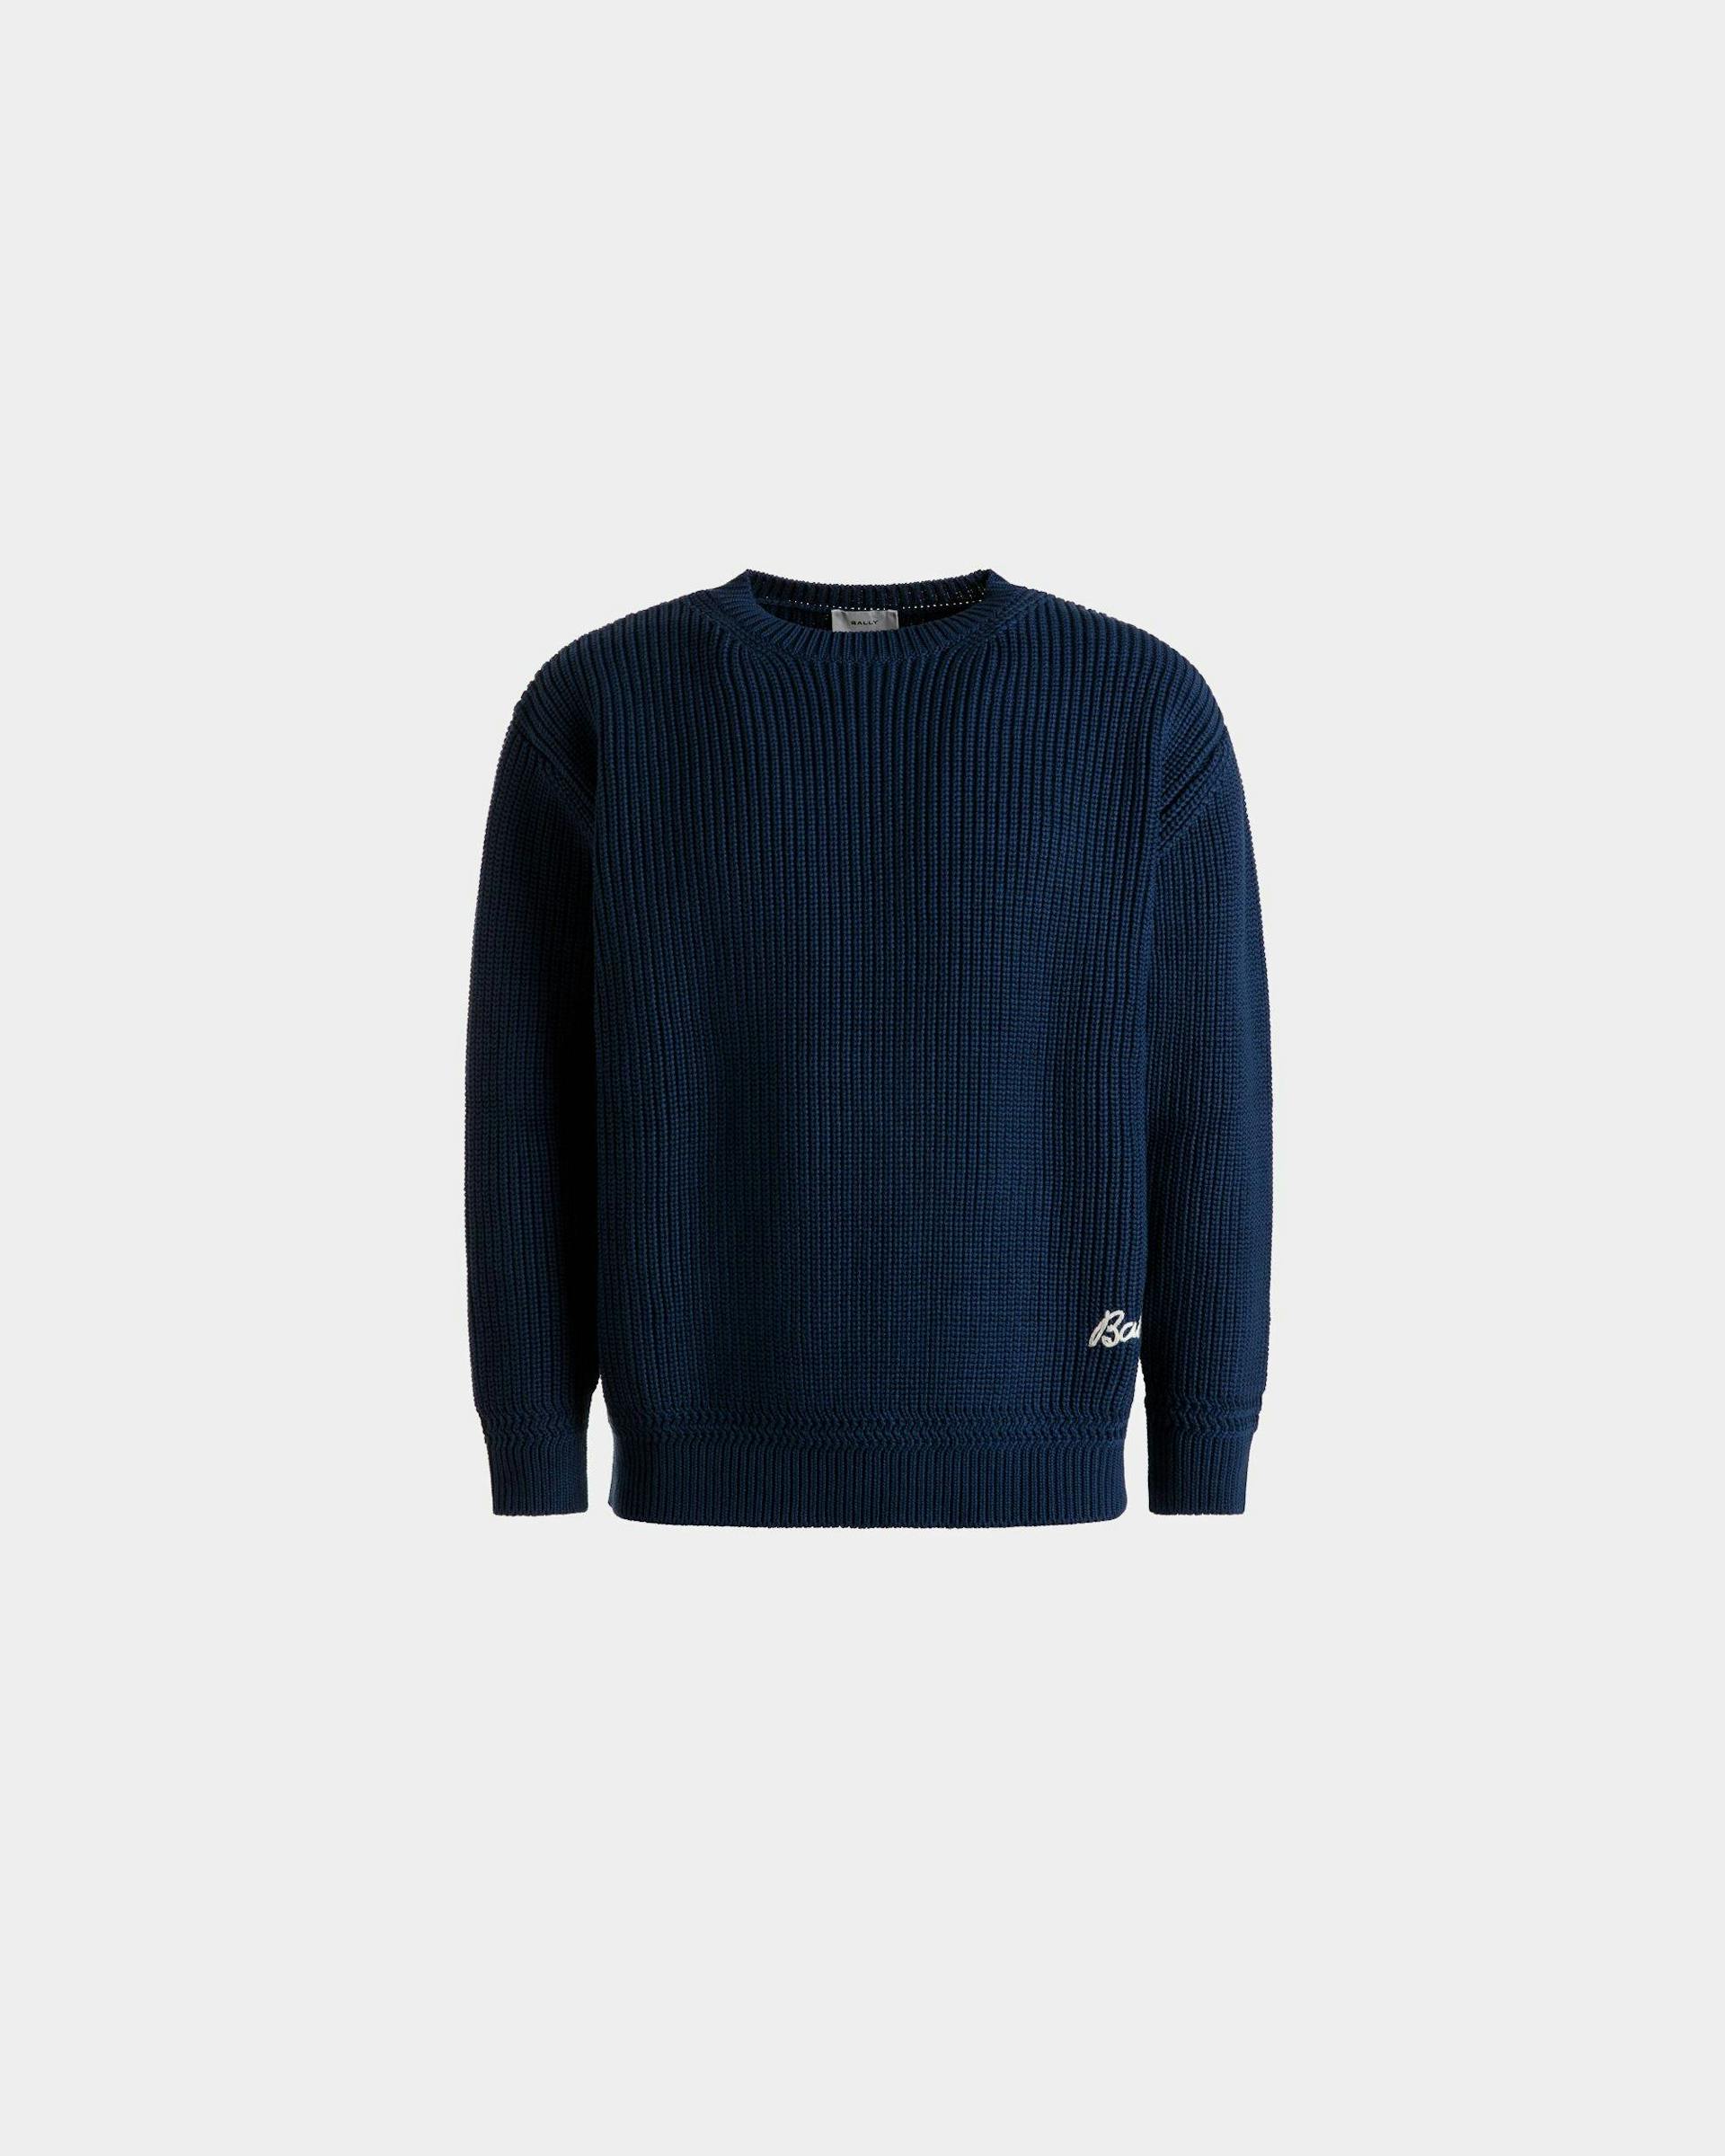 Men's Crewneck Sweater in Blue Cotton | Bally | Still Life Front